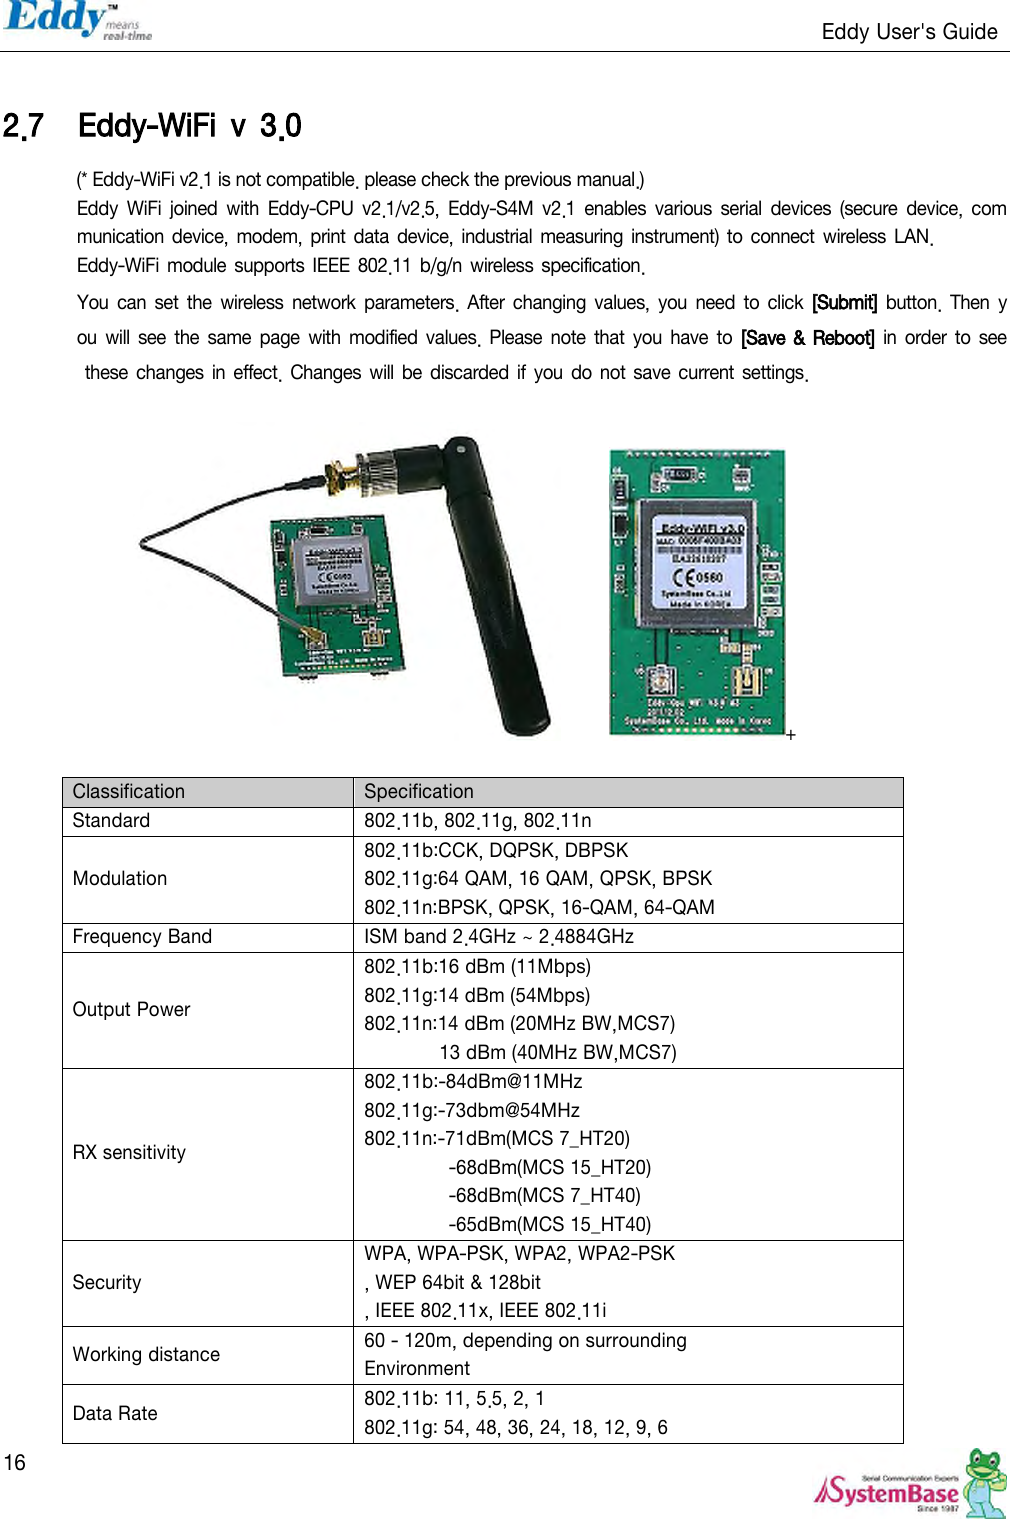                                                                   Eddy User&apos;s Guide   16  2.7 Eddy-WiFi  v  3.0 (* Eddy-WiFi v2.1 is not compatible. please check the previous manual.) Eddy  WiFi joined  with  Eddy-CPU v2.1/v2.5,  Eddy-S4M  v2.1  enables various  serial  devices  (secure  device, communication device, modem, print data  device, industrial  measuring  instrument)  to connect  wireless LAN. Eddy-WiFi module supports IEEE  802.11 b/g/n  wireless specification.   You can set the wireless  network parameters. After changing  values, you  need to  click [Submit] button.  Then you  will see the same page  with  modified values. Please note  that  you have to [Save &amp; Reboot]  in  order to  see these changes in effect. Changes  will be discarded if  you  do not save current settings.           +  Classification Specification Standard 802.11b, 802.11g, 802.11n Modulation 802.11b:CCK, DQPSK, DBPSK 802.11g:64 QAM, 16 QAM, QPSK, BPSK 802.11n:BPSK, QPSK, 16-QAM, 64-QAM Frequency Band ISM band 2.4GHz ~ 2.4884GHz Output Power 802.11b:16 dBm (11Mbps) 802.11g:14 dBm (54Mbps) 802.11n:14 dBm (20MHz BW,MCS7) 13 dBm (40MHz BW,MCS7) RX sensitivity 802.11b:-84dBm@11MHz 802.11g:-73dbm@54MHz 802.11n:-71dBm(MCS 7_HT20) -68dBm(MCS 15_HT20) -68dBm(MCS 7_HT40) -65dBm(MCS 15_HT40) Security WPA, WPA-PSK, WPA2, WPA2-PSK , WEP 64bit &amp; 128bit , IEEE 802.11x, IEEE 802.11i Working distance 60 - 120m, depending on surrounding Environment Data Rate 802.11b: 11, 5.5, 2, 1   802.11g: 54, 48, 36, 24, 18, 12, 9, 6   